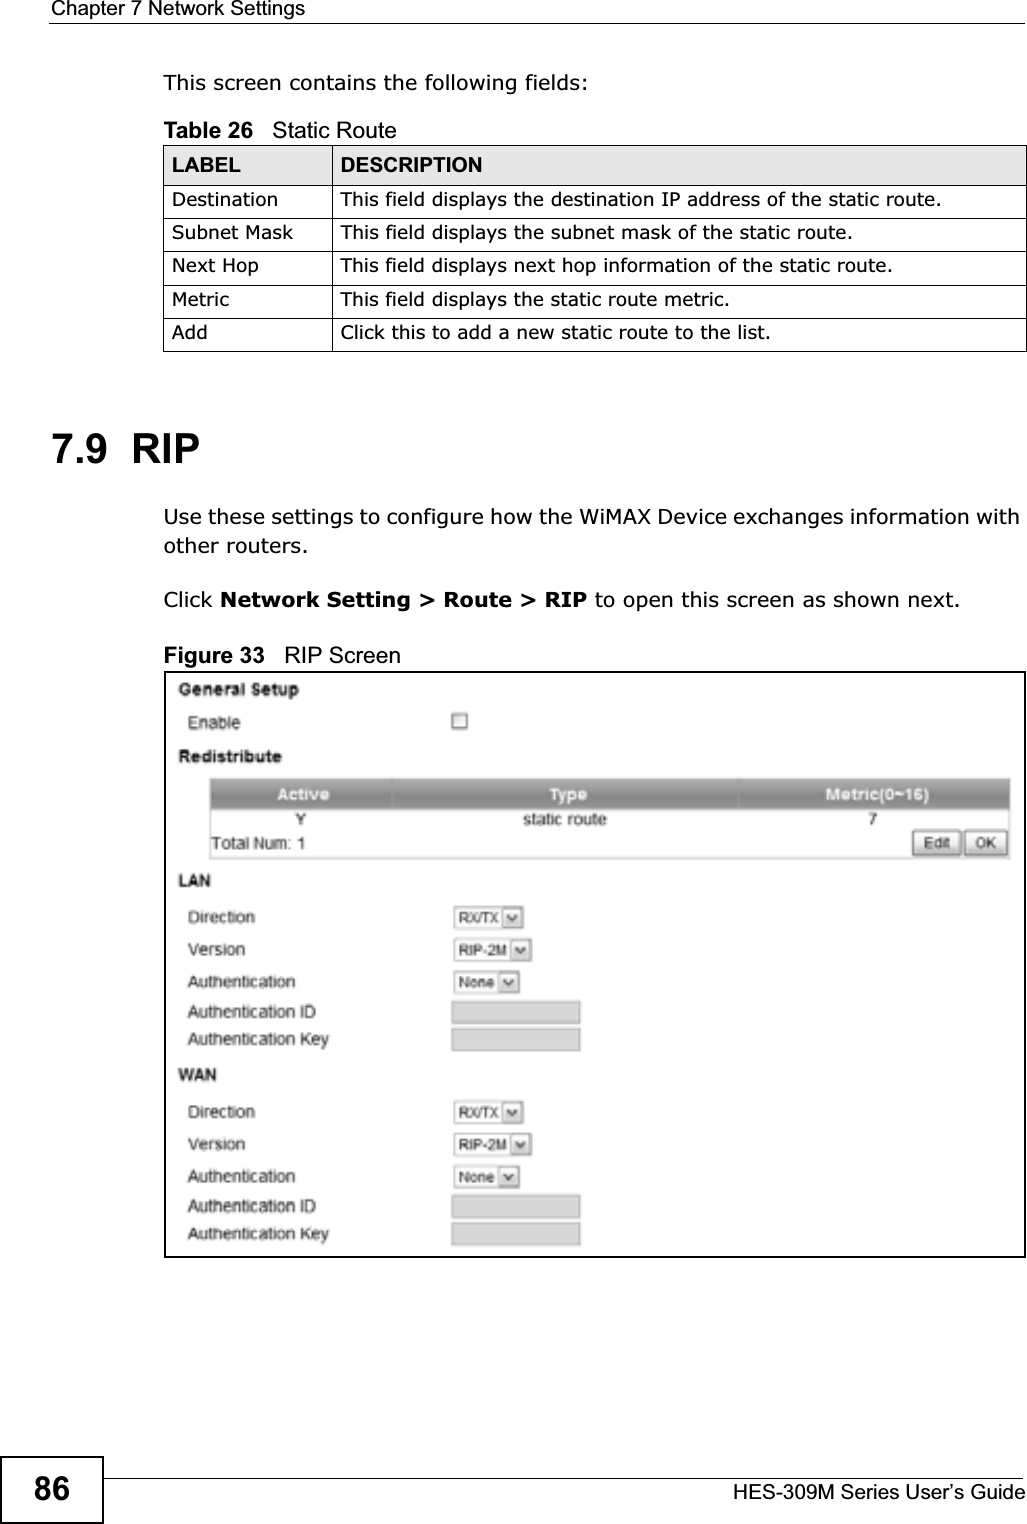 Chapter 7 Network SettingsHES-309M Series User’s Guide86This screen contains the following fields:7.9  RIPUse these settings to configure how the WiMAX Device exchanges information with other routers.Click Network Setting &gt; Route &gt; RIP to open this screen as shown next.Figure 33   RIP ScreenTable 26   Static RouteLABEL DESCRIPTIONDestination This field displays the destination IP address of the static route.Subnet Mask This field displays the subnet mask of the static route.Next Hop This field displays next hop information of the static route.Metric This field displays the static route metric.Add Click this to add a new static route to the list.